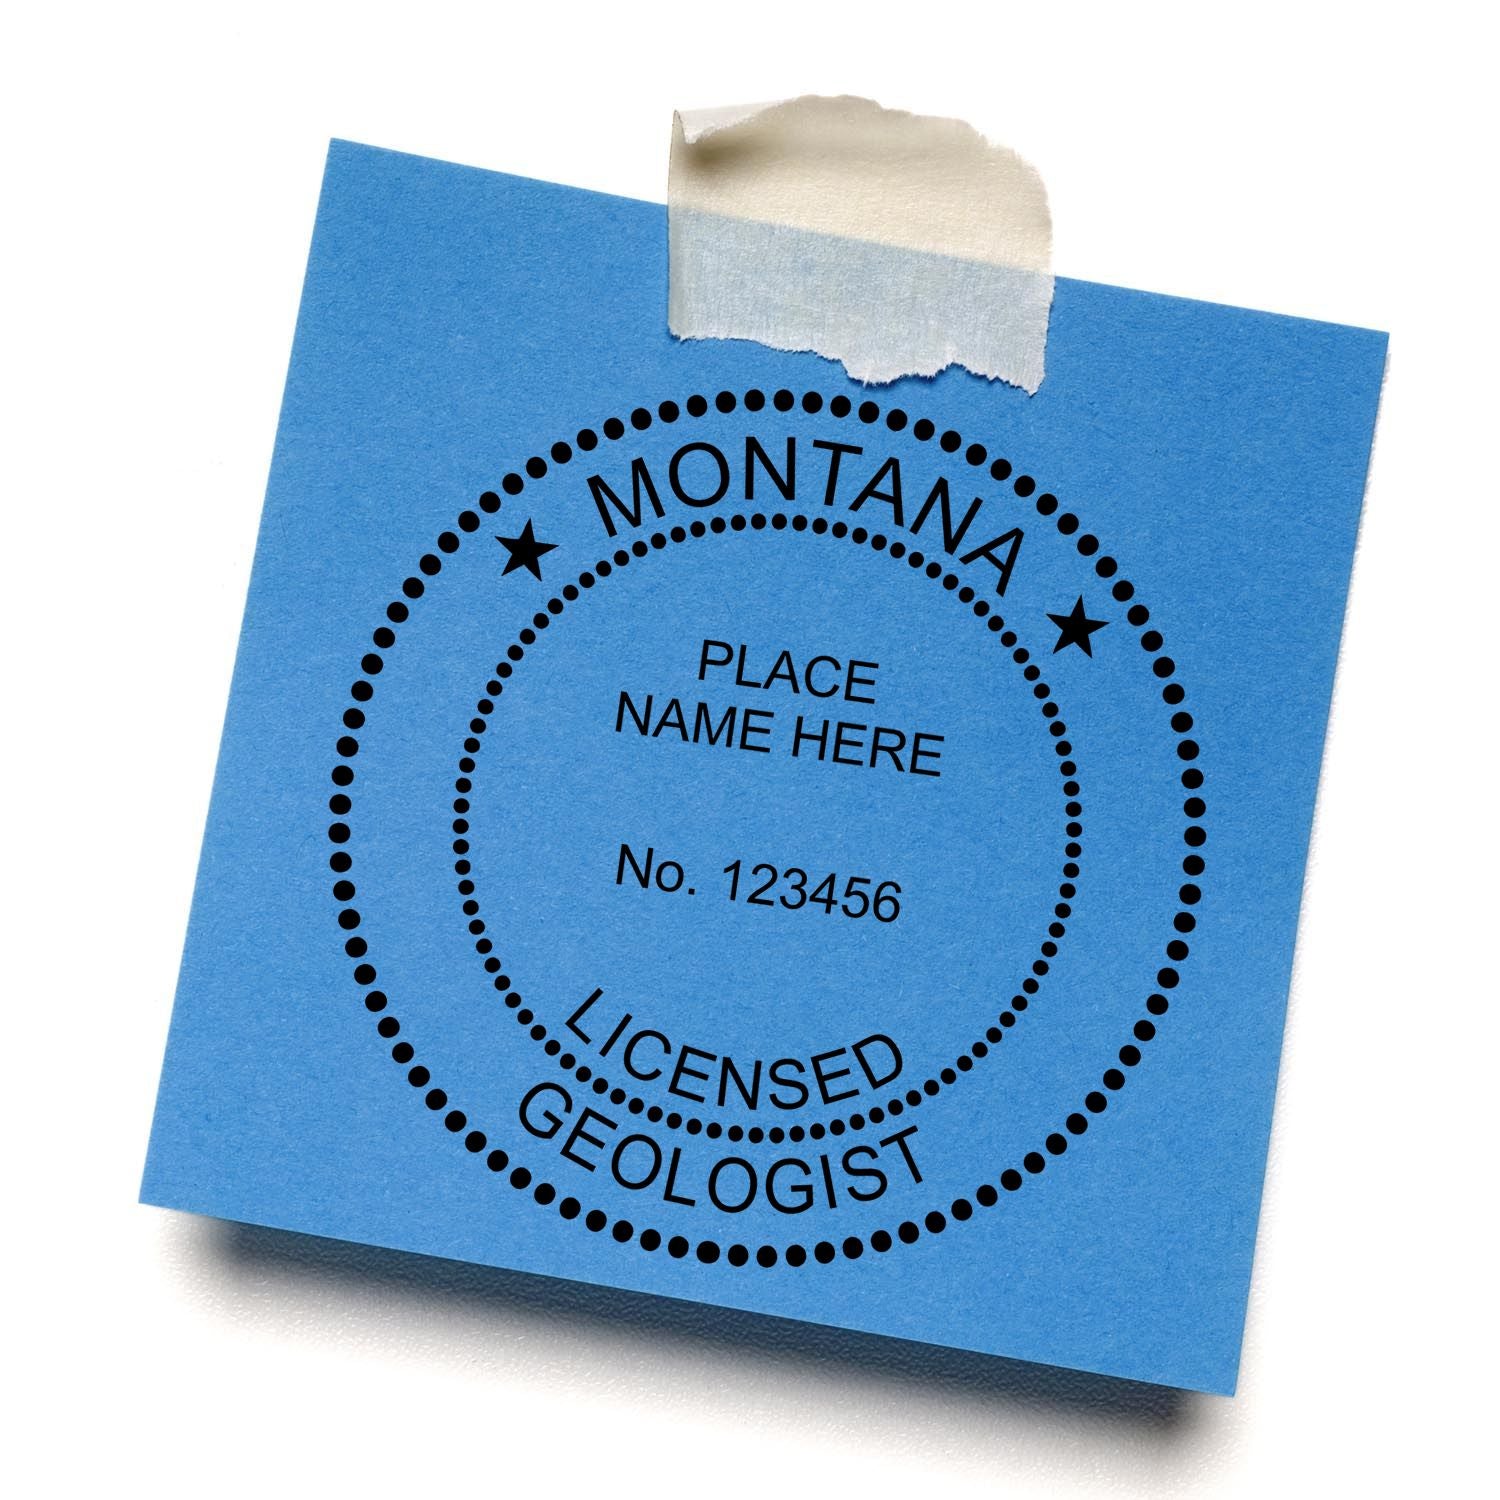 The main image for the Self-Inking Montana Geologist Stamp depicting a sample of the imprint and imprint sample